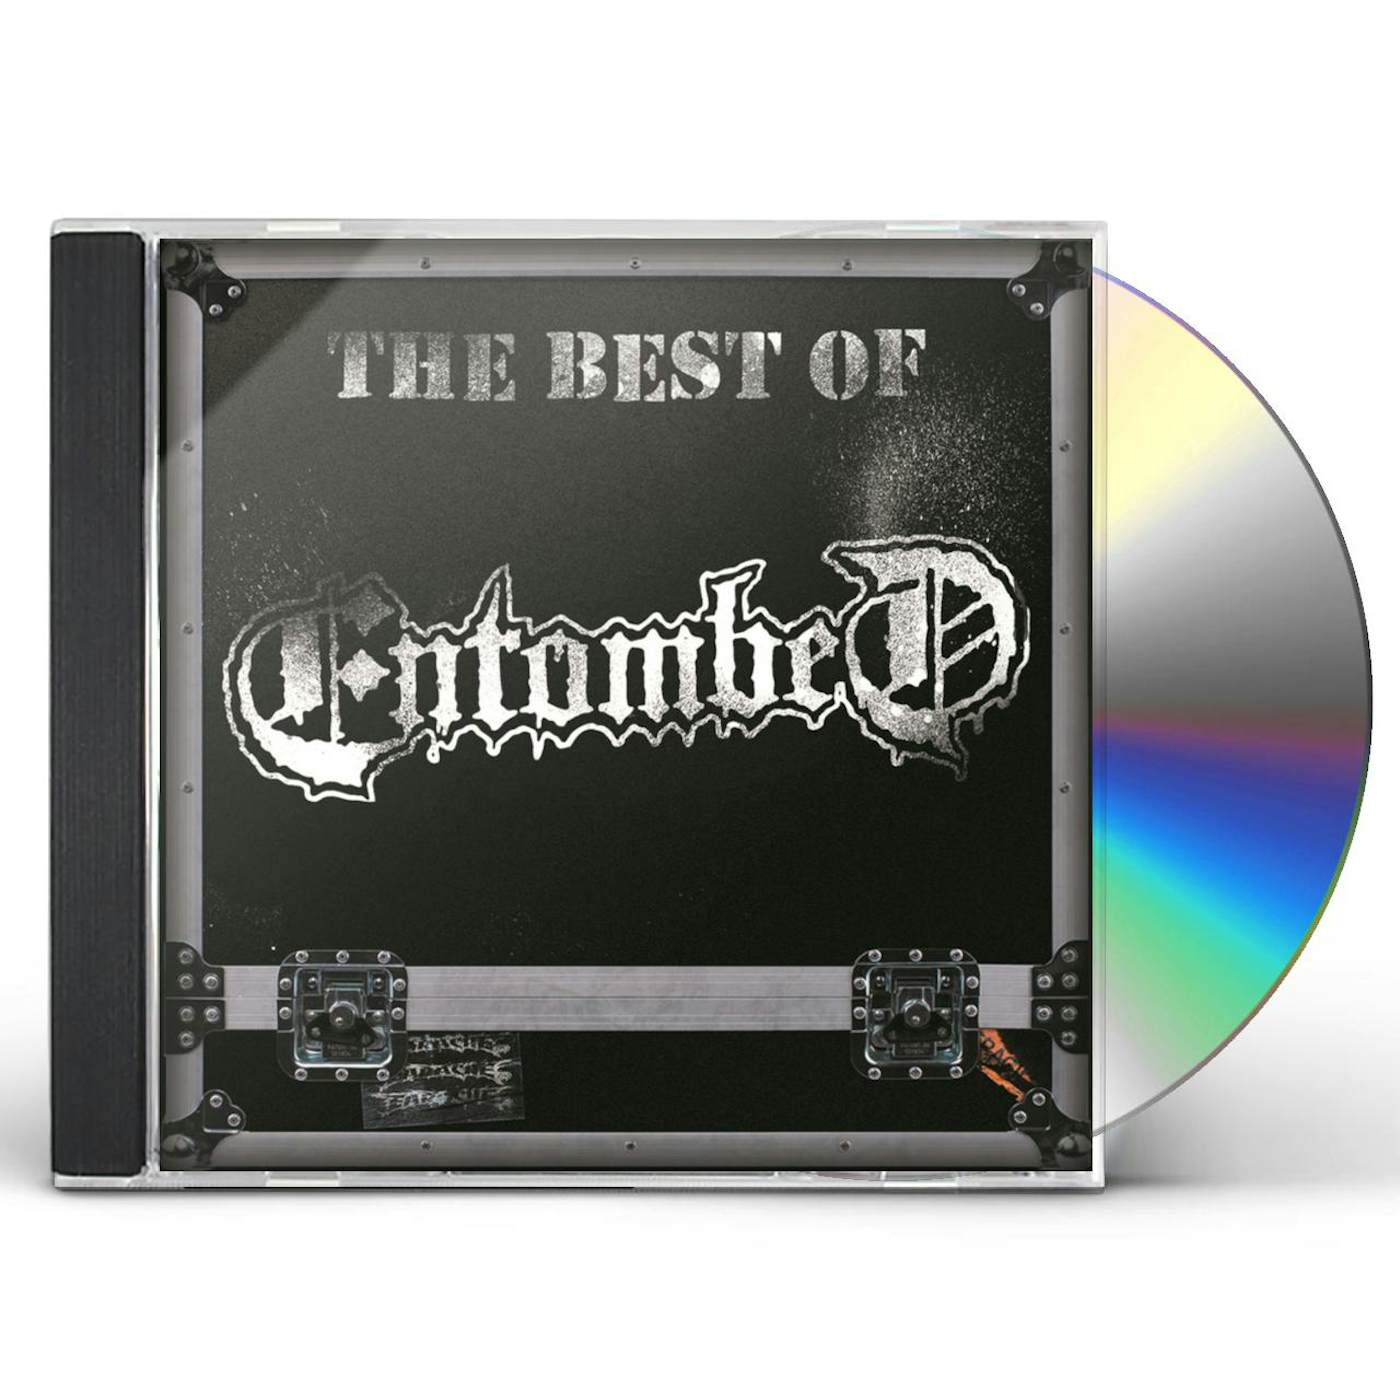 BEST OF ENTOMBED CD